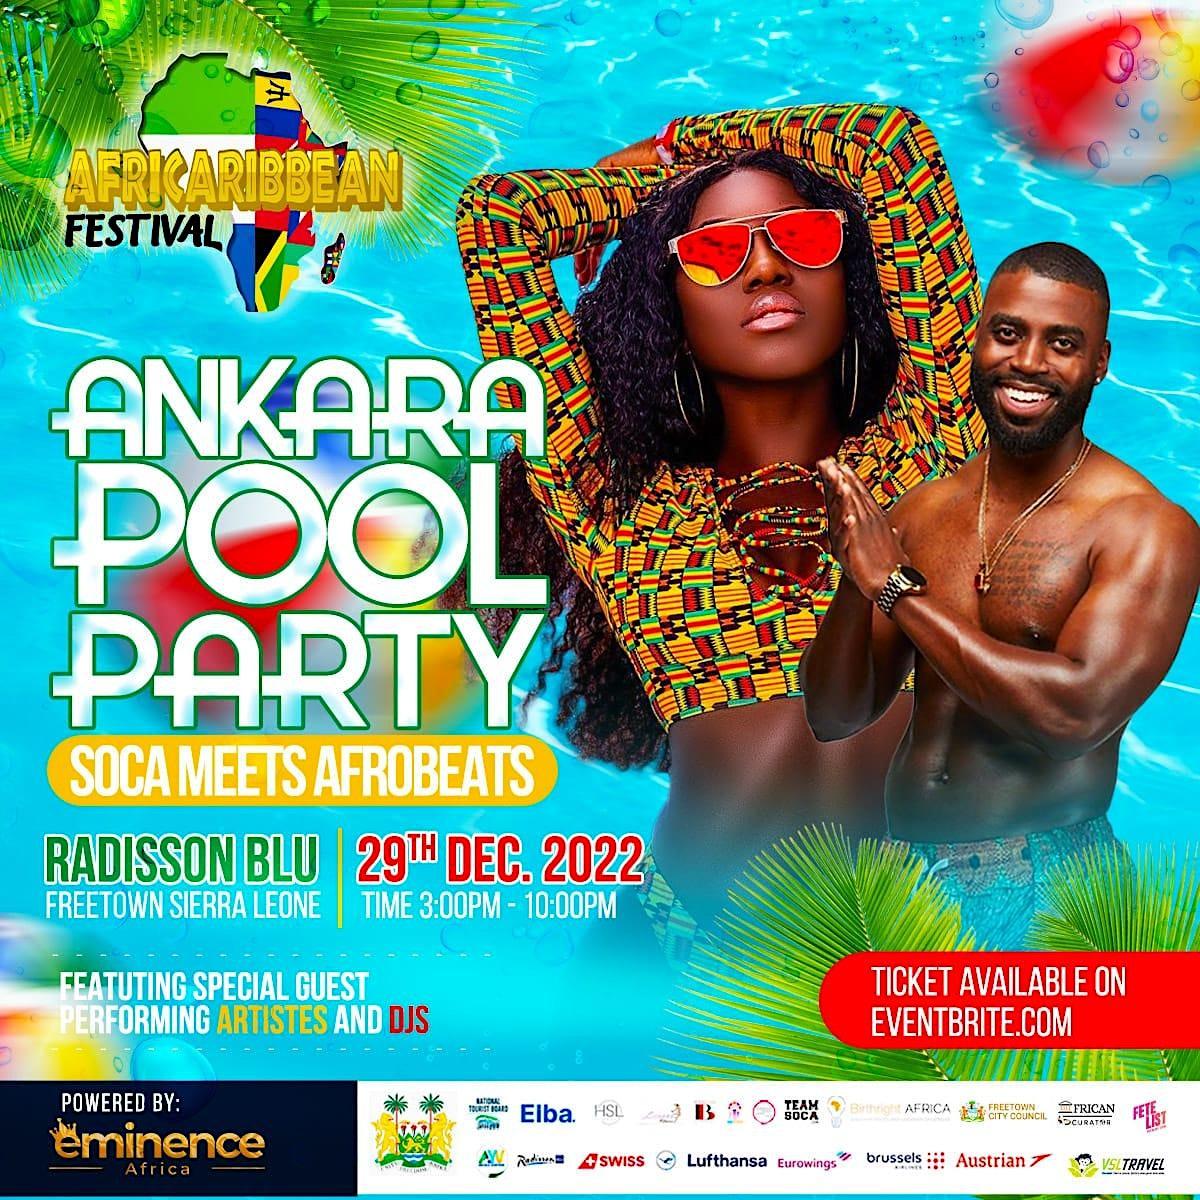 African BeachWear Pool Party flyer or graphic.